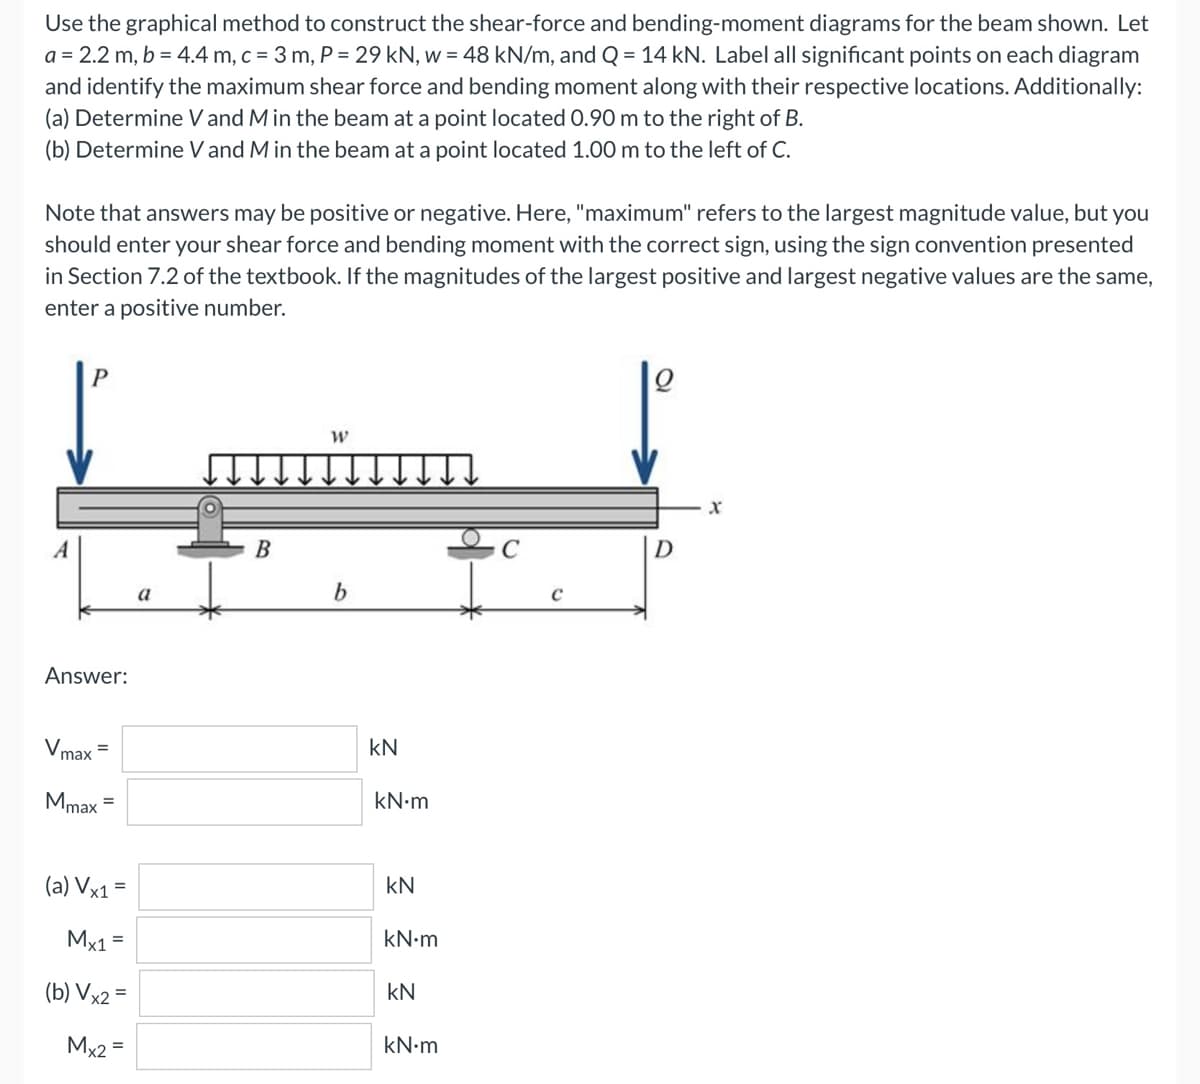 Use the graphical method to construct the shear-force and bending-moment diagrams for the beam shown. Let
a = 2.2 m, b = 4.4 m, c = 3 m, P = 29 kN, w = 48 kN/m, and Q = 14 kN. Label all significant points on each diagram
and identify the maximum shear force and bending moment along with their respective locations. Additionally:
(a) Determine V and M in the beam at a point located 0.90 m to the right of B.
(b) Determine V and M in the beam at a point located 1.00 m to the left of C.
Note that answers may be positive or negative. Here, "maximum" refers to the largest magnitude value, but you
should enter your shear force and bending moment with the correct sign, using the sign convention presented
in Section 7.2 of the textbook. If the magnitudes of the largest positive and largest negative values are the same,
enter a positive number.
Q
W
A
b
Answer:
max
Mmax
(a) Vx1 =
Mx1 =
(b) Vx2 =
Mx2 =
=
a
B
kN
kN.m
kN
kN•m
kN
kN•m
C
D
X